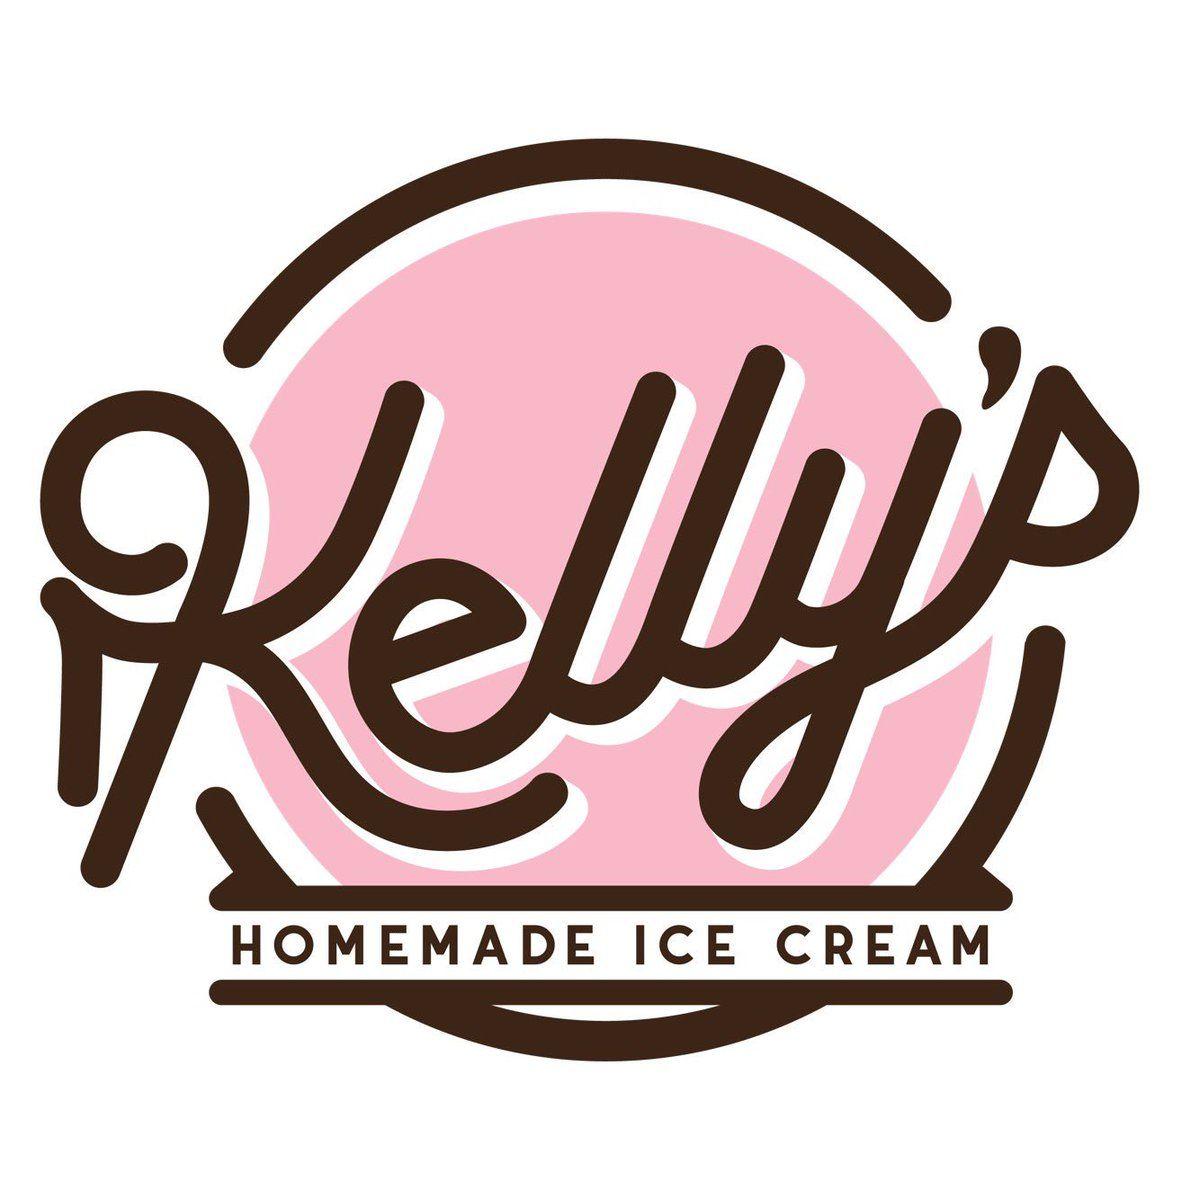 Kelly's Logo - Kelly's HMIC our new logo? At the beginning